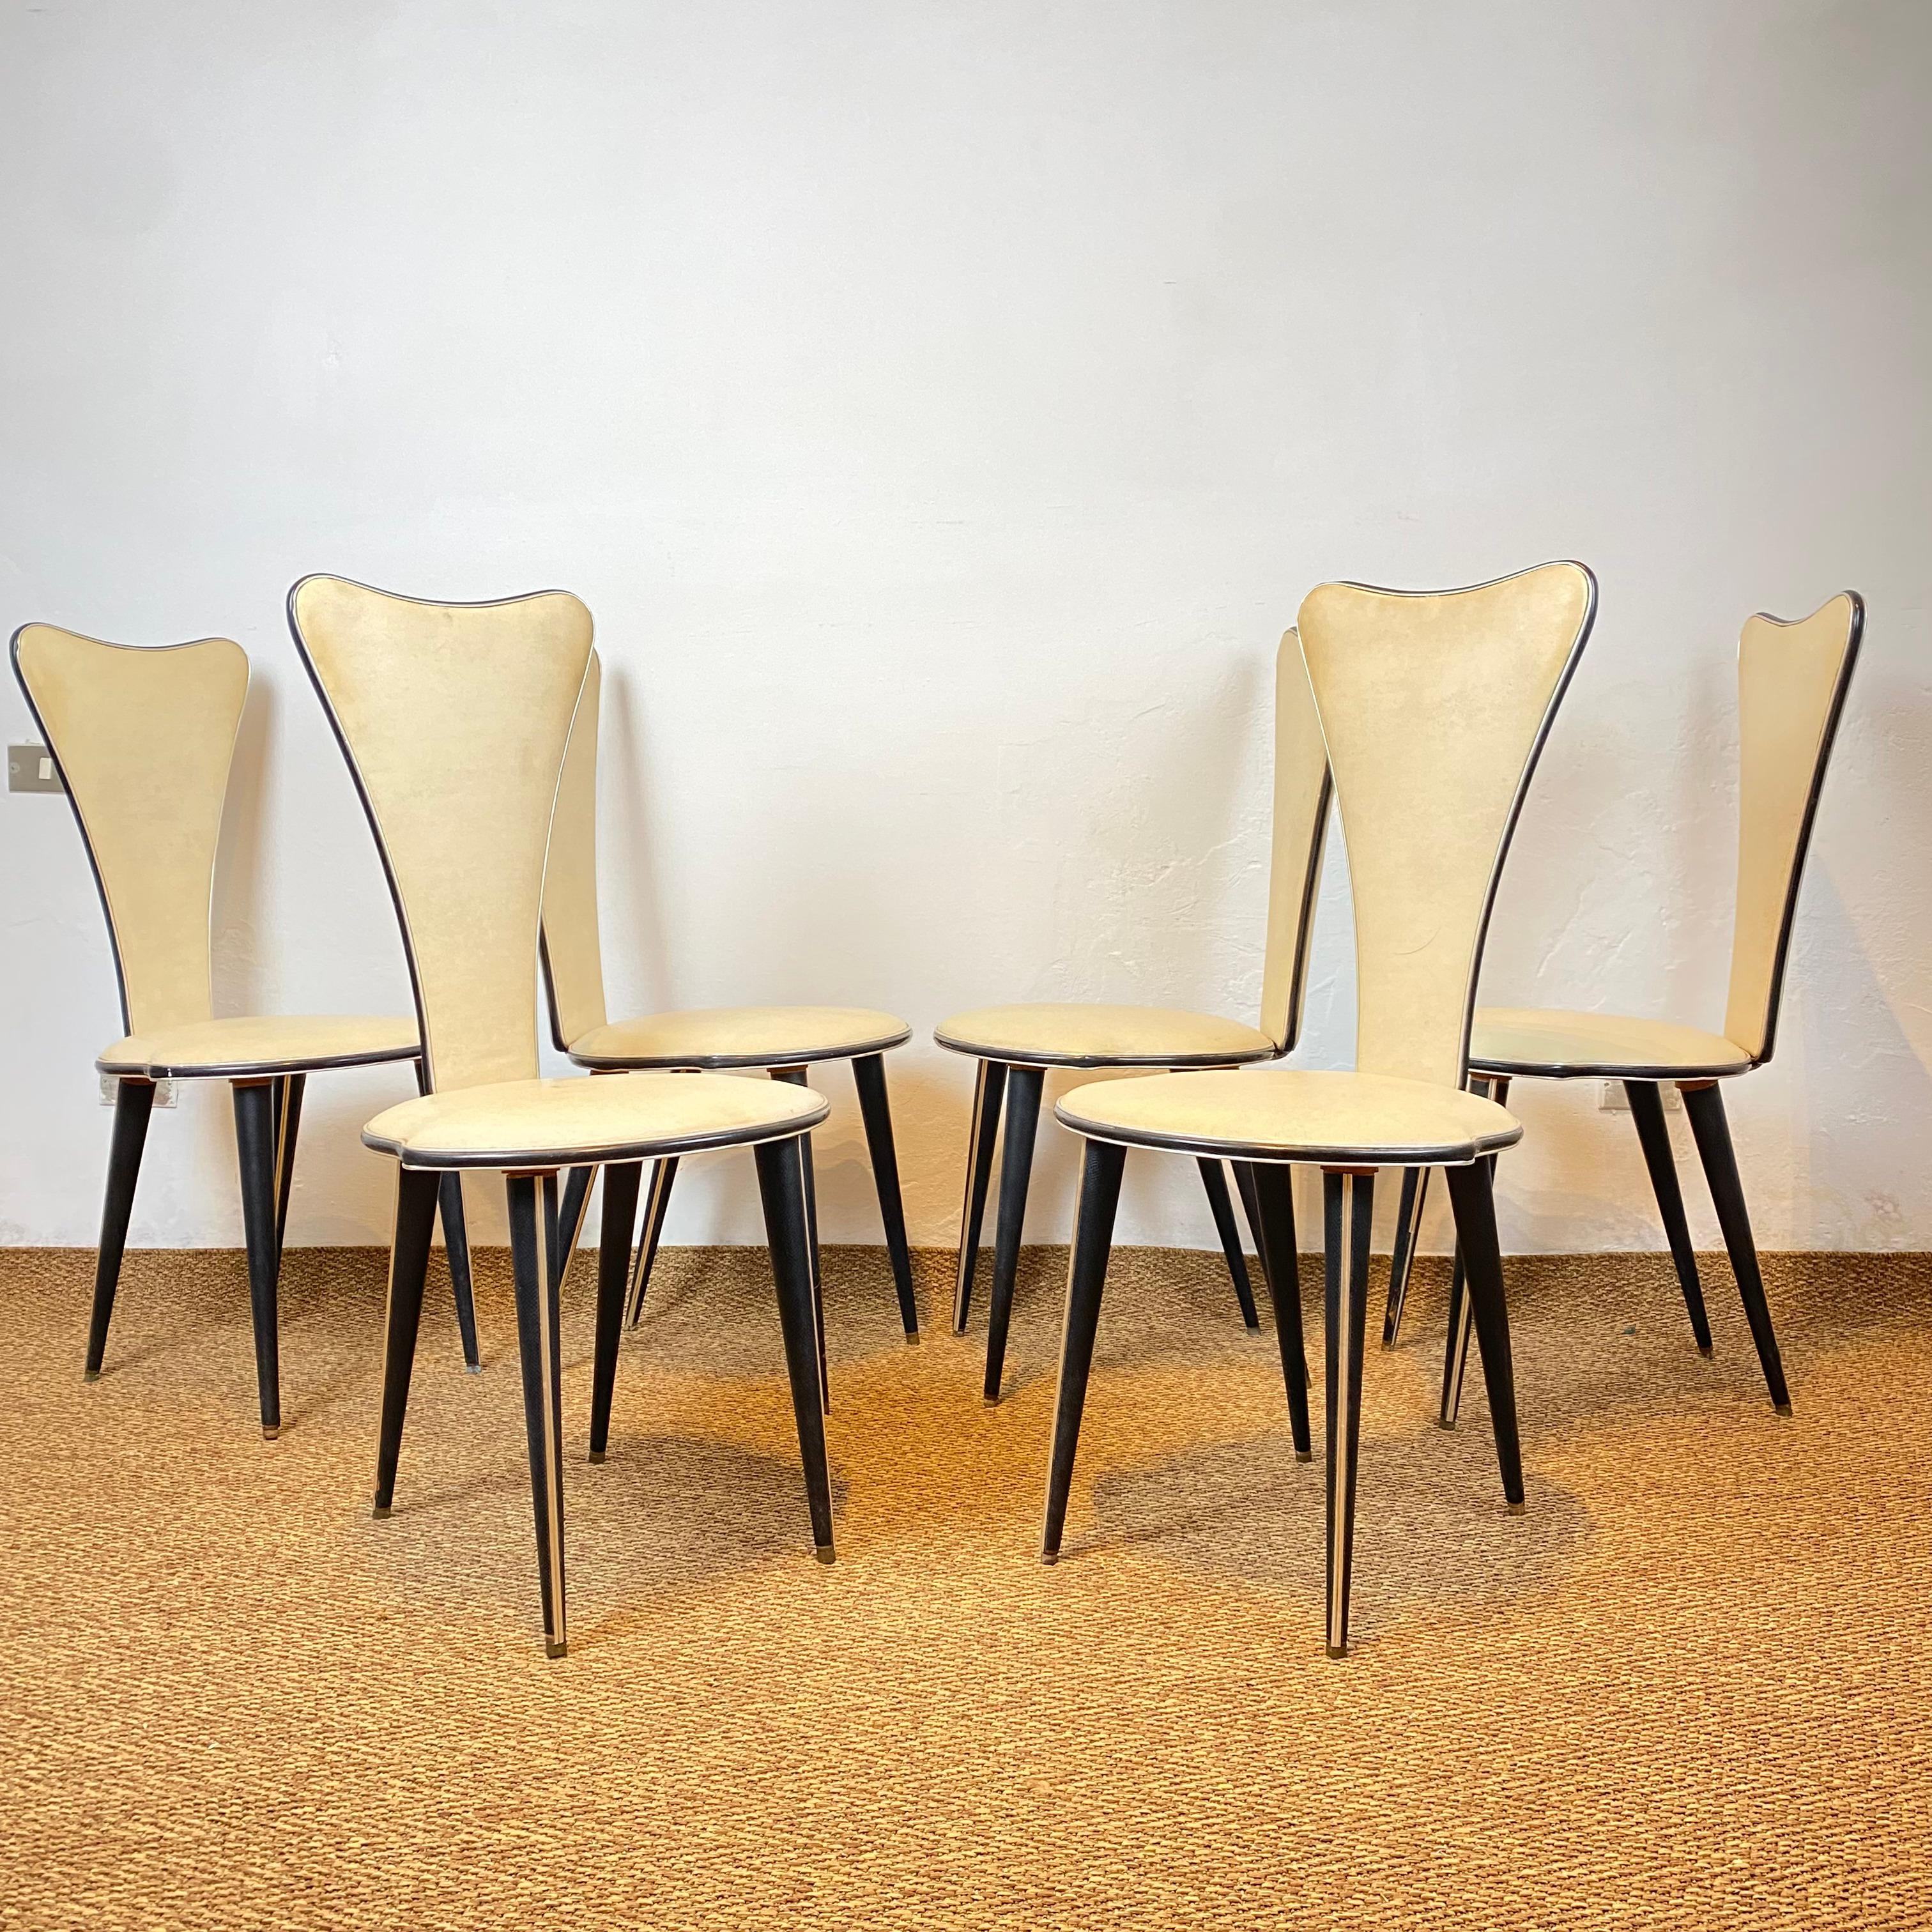 Aluminum Set of Six Chairs by Umberto Mascagni, 1950s